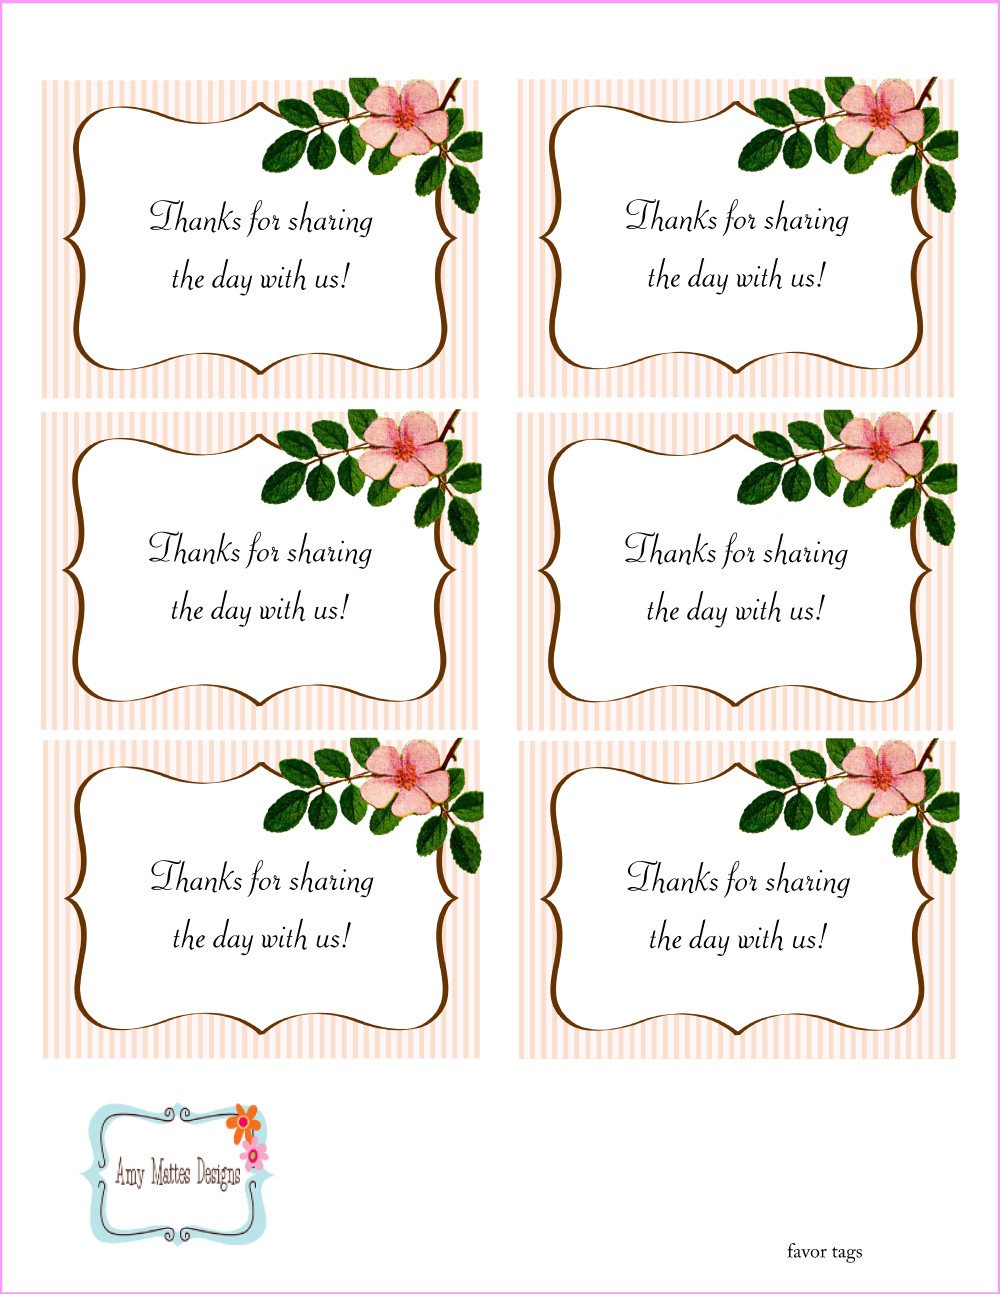 FREE Mother s Day Printables from Amy Mattes Designs